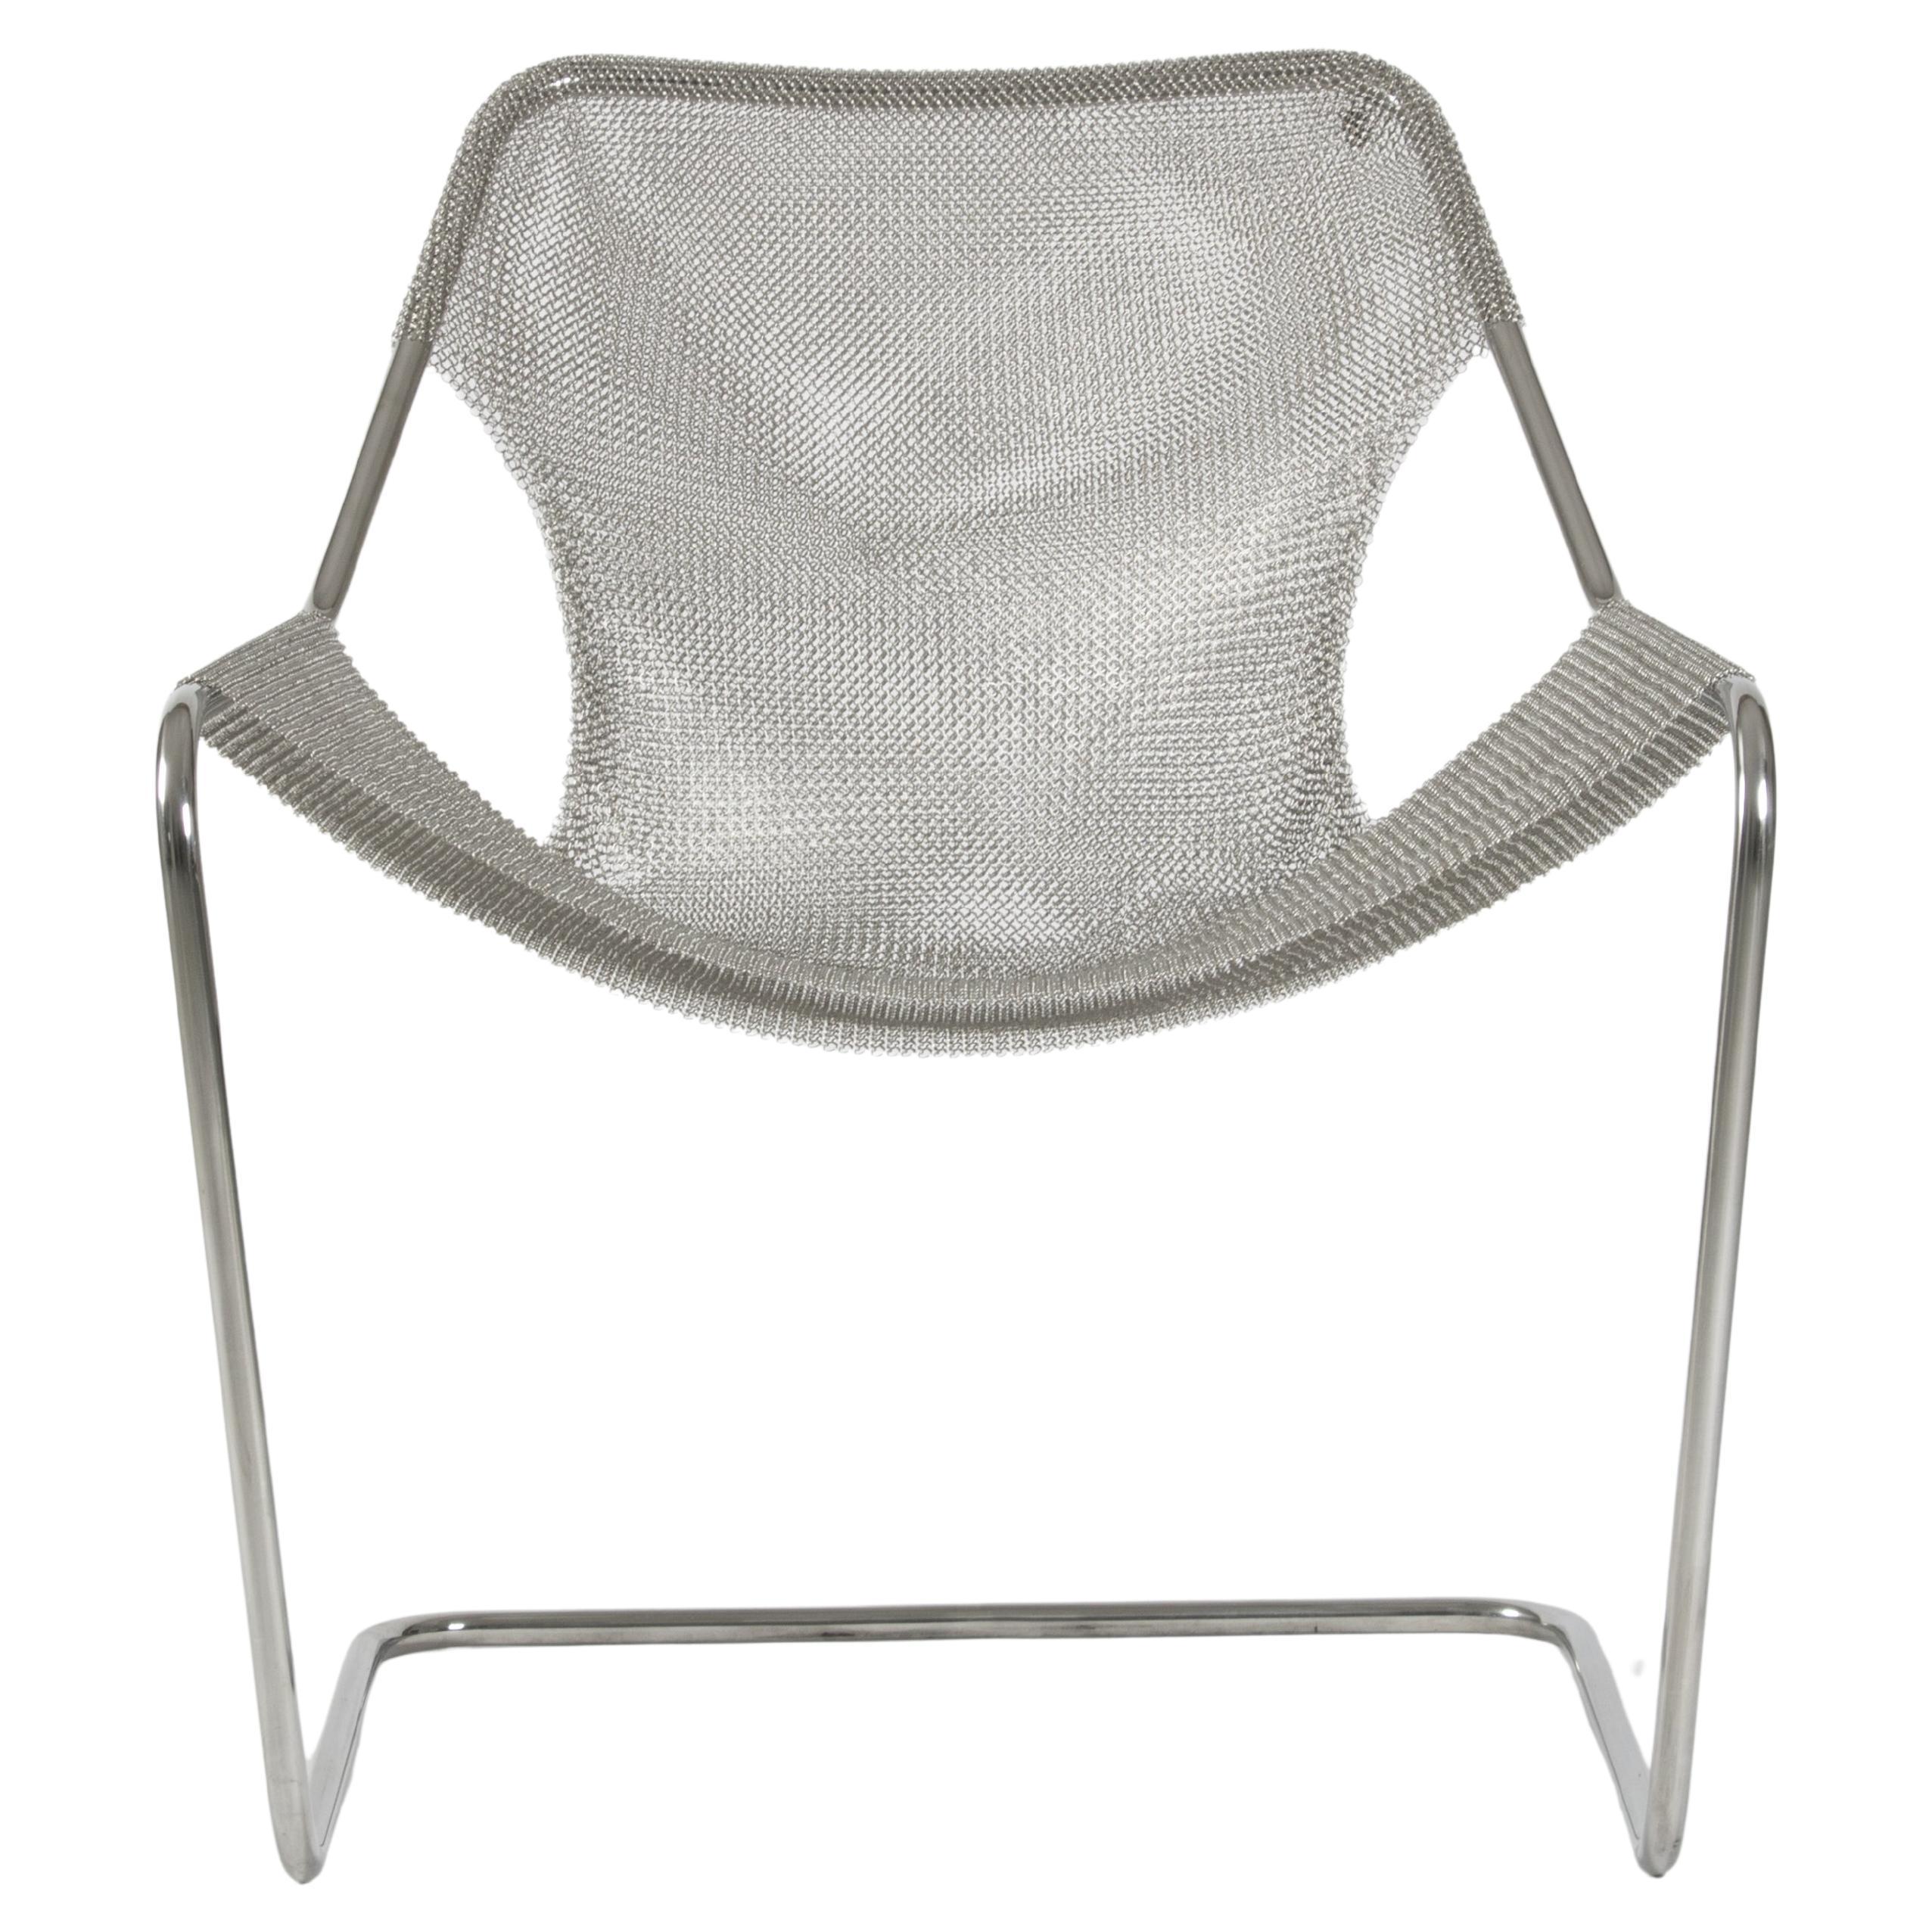 Paulistano Mesh And Stainless Steel Chair by Objekto